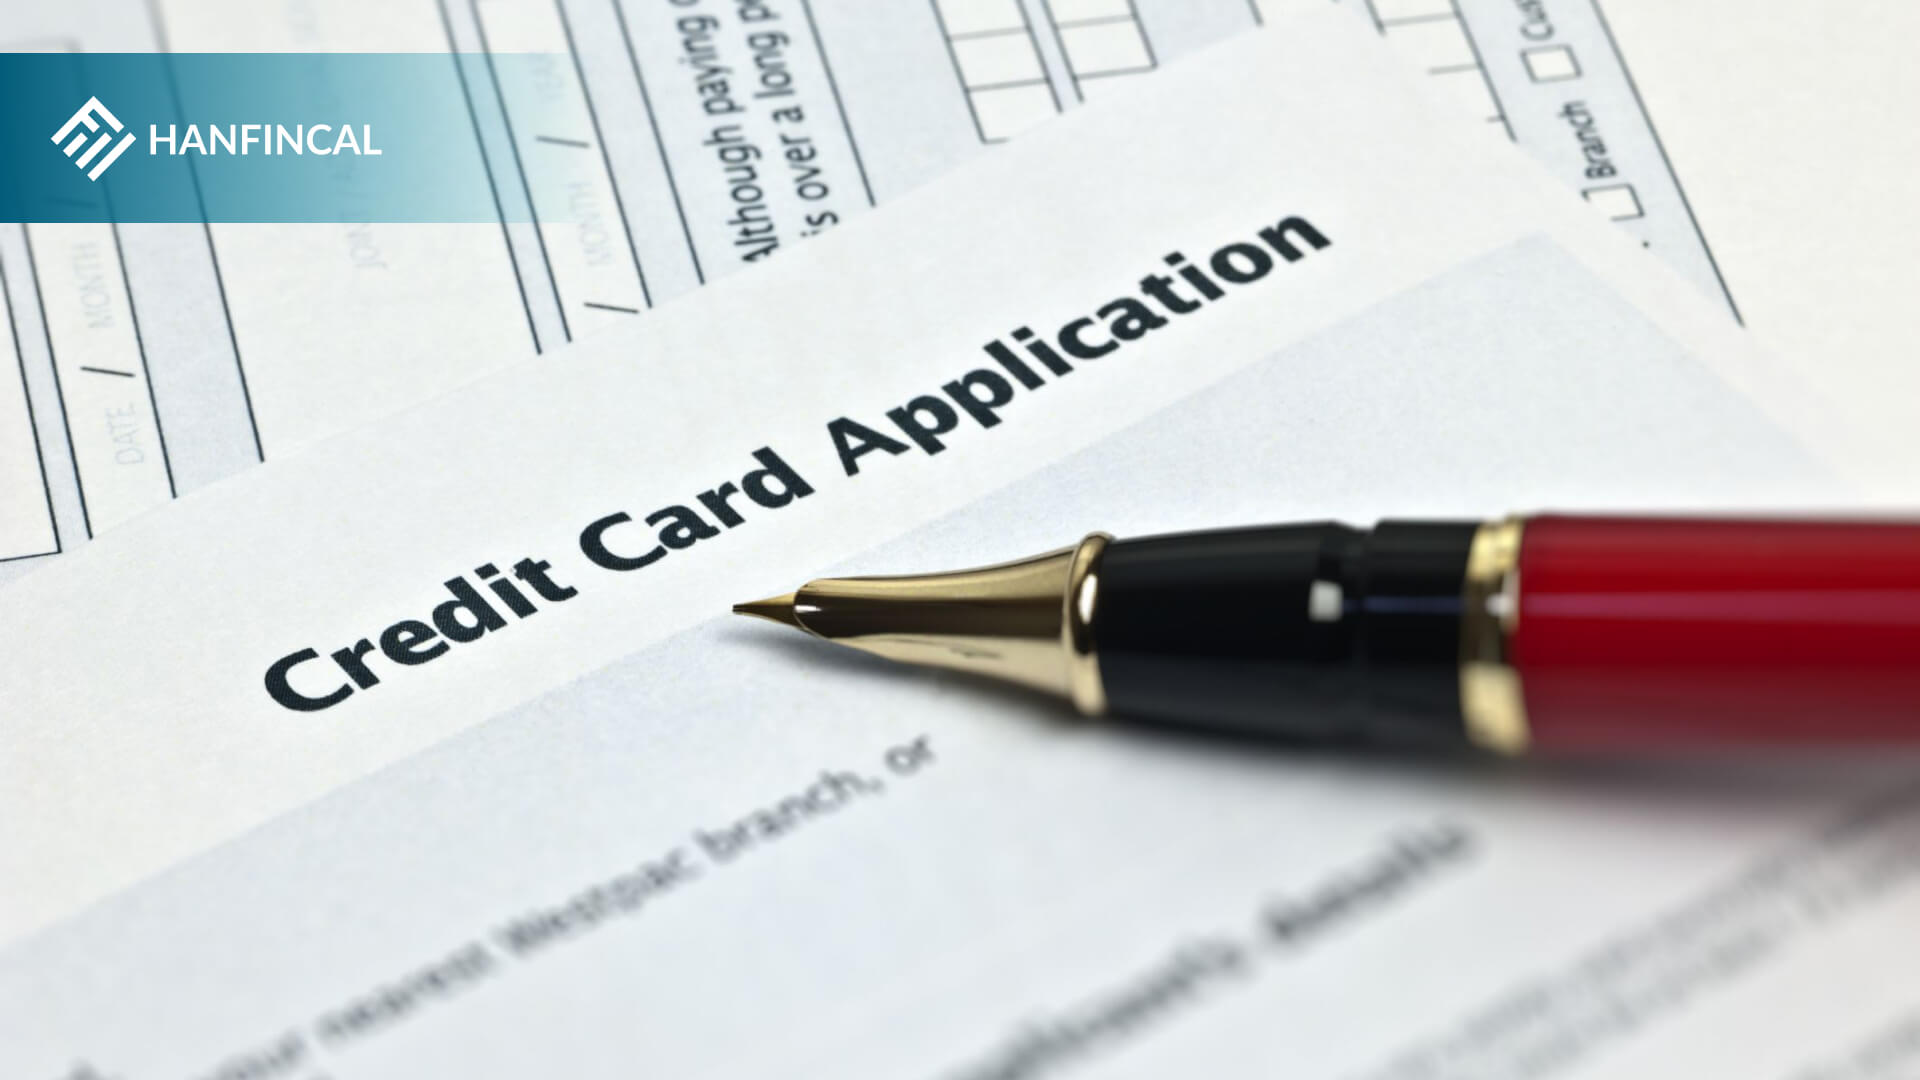 How to declare income on a credit card application?